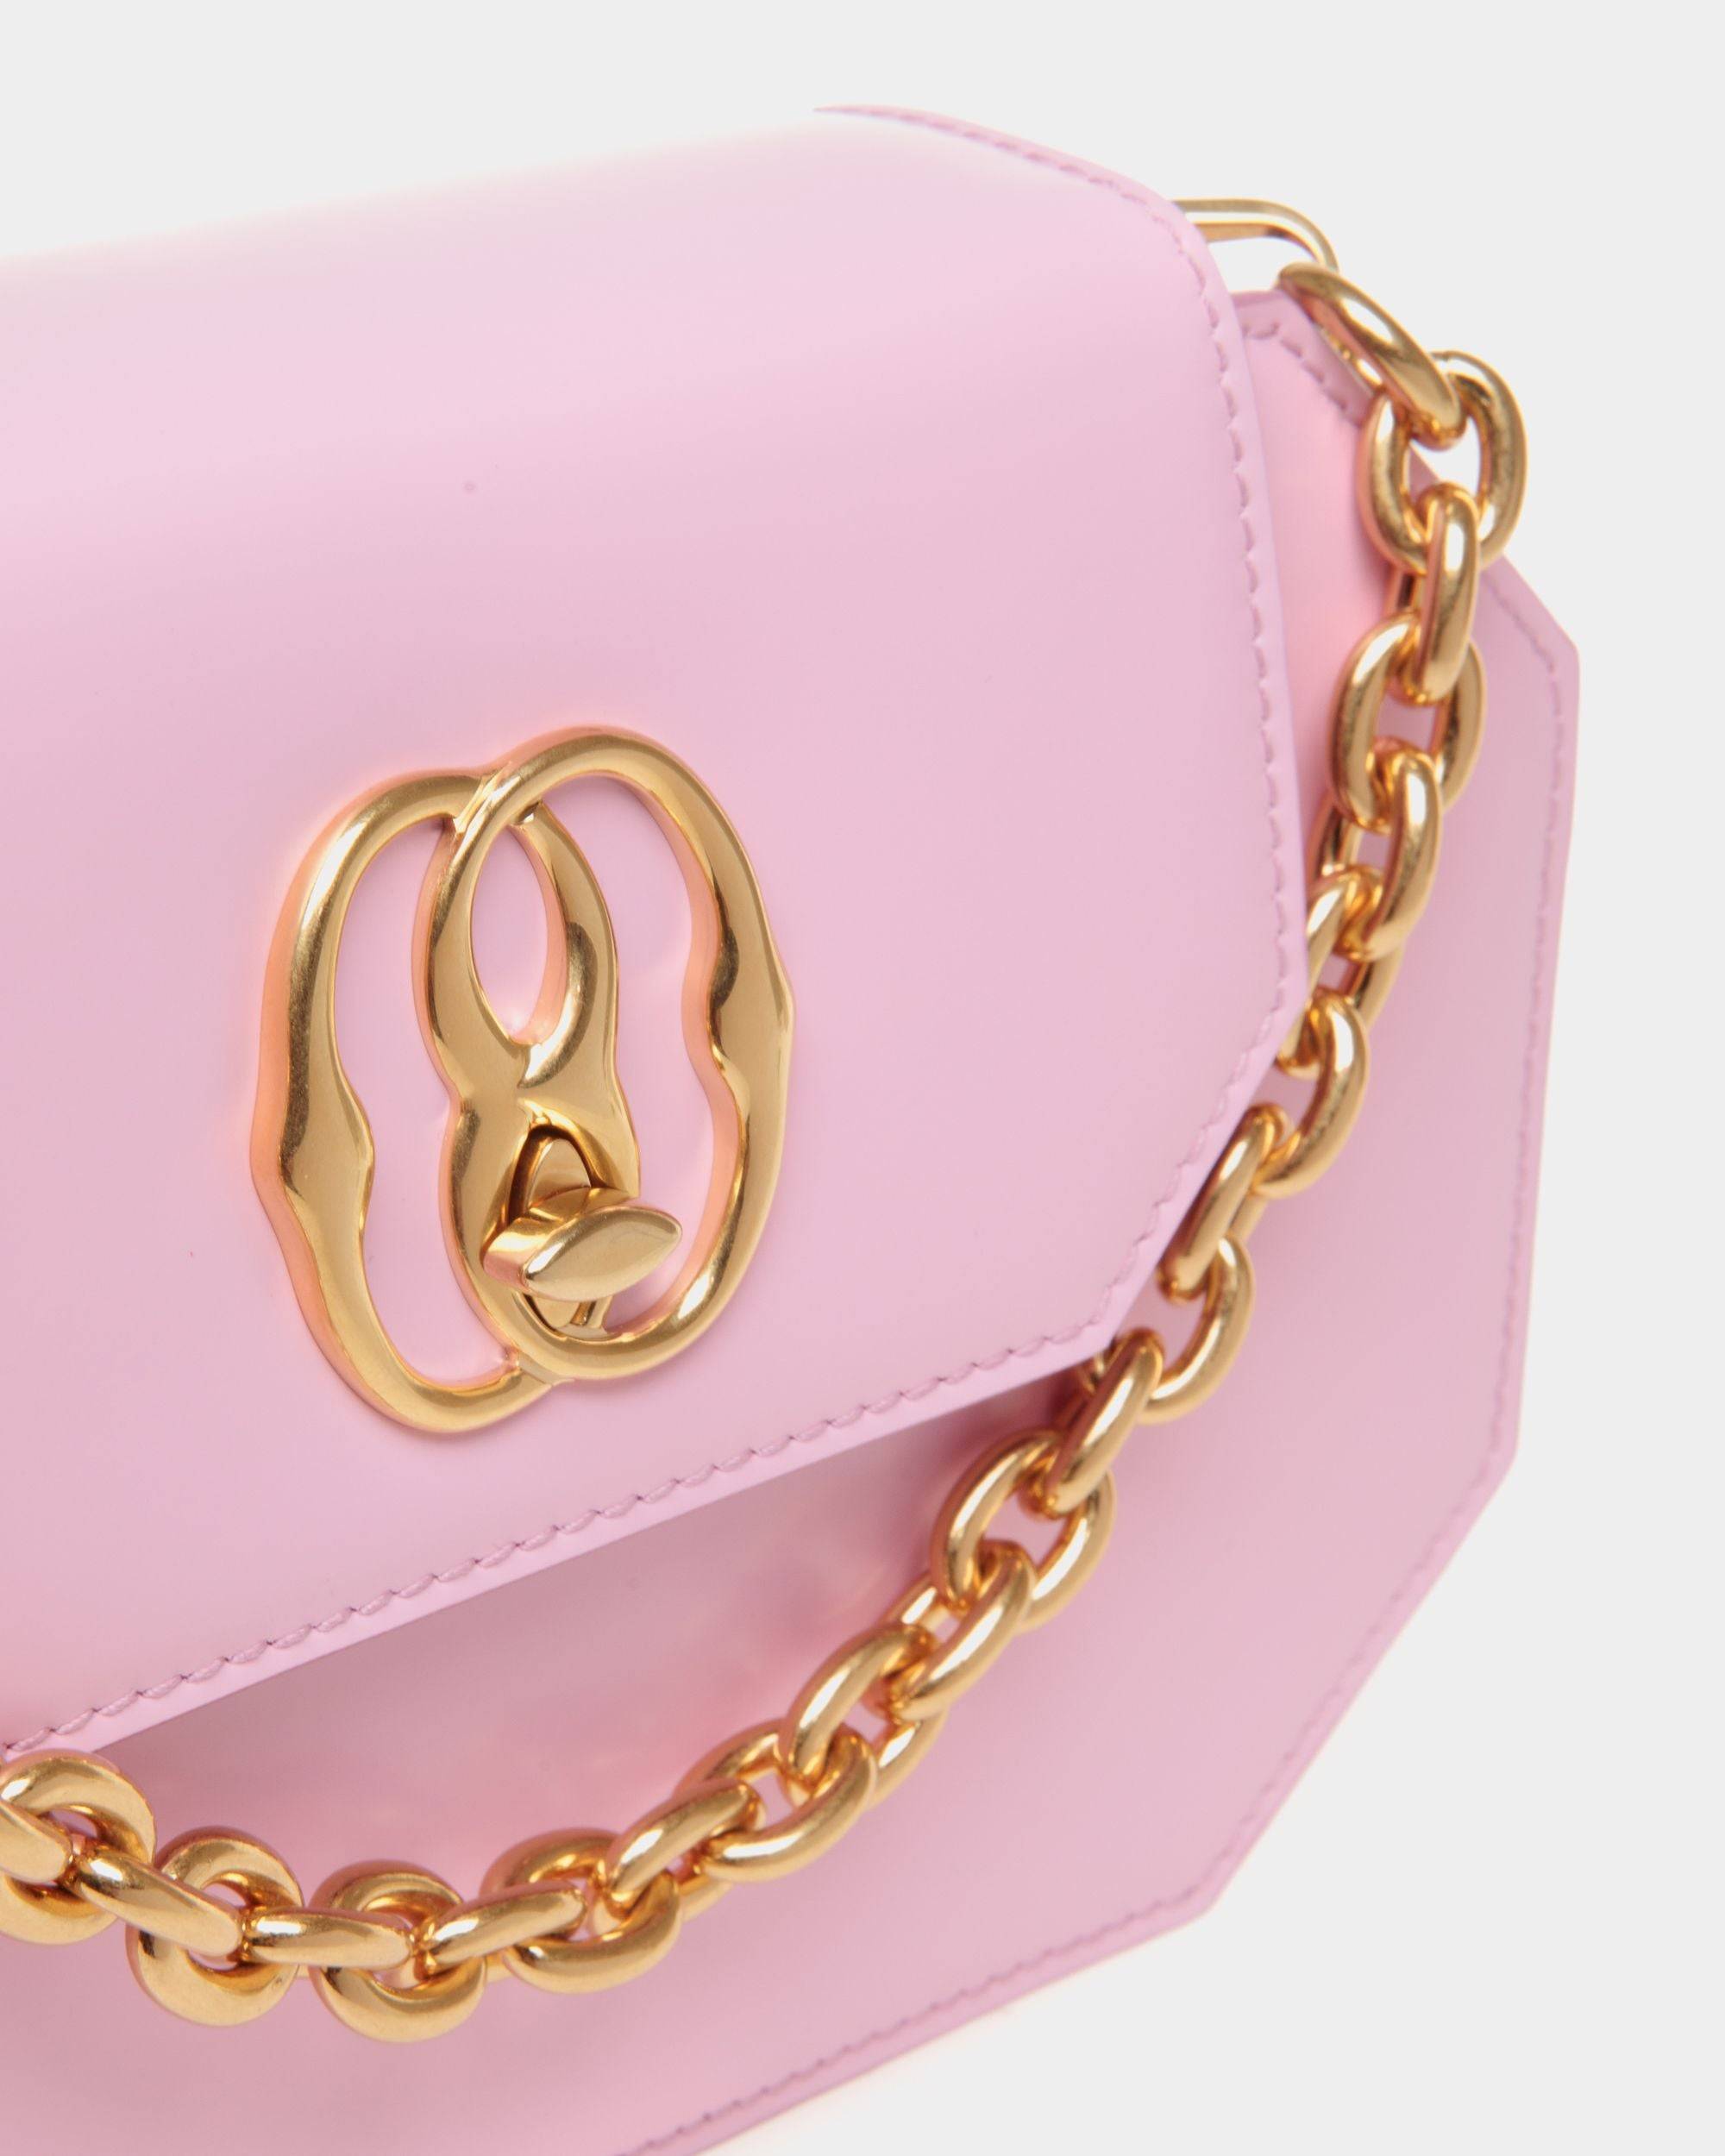 Emblem | Women's Mini Bag in Pink Brushed Leather | Bally | Still Life Detail